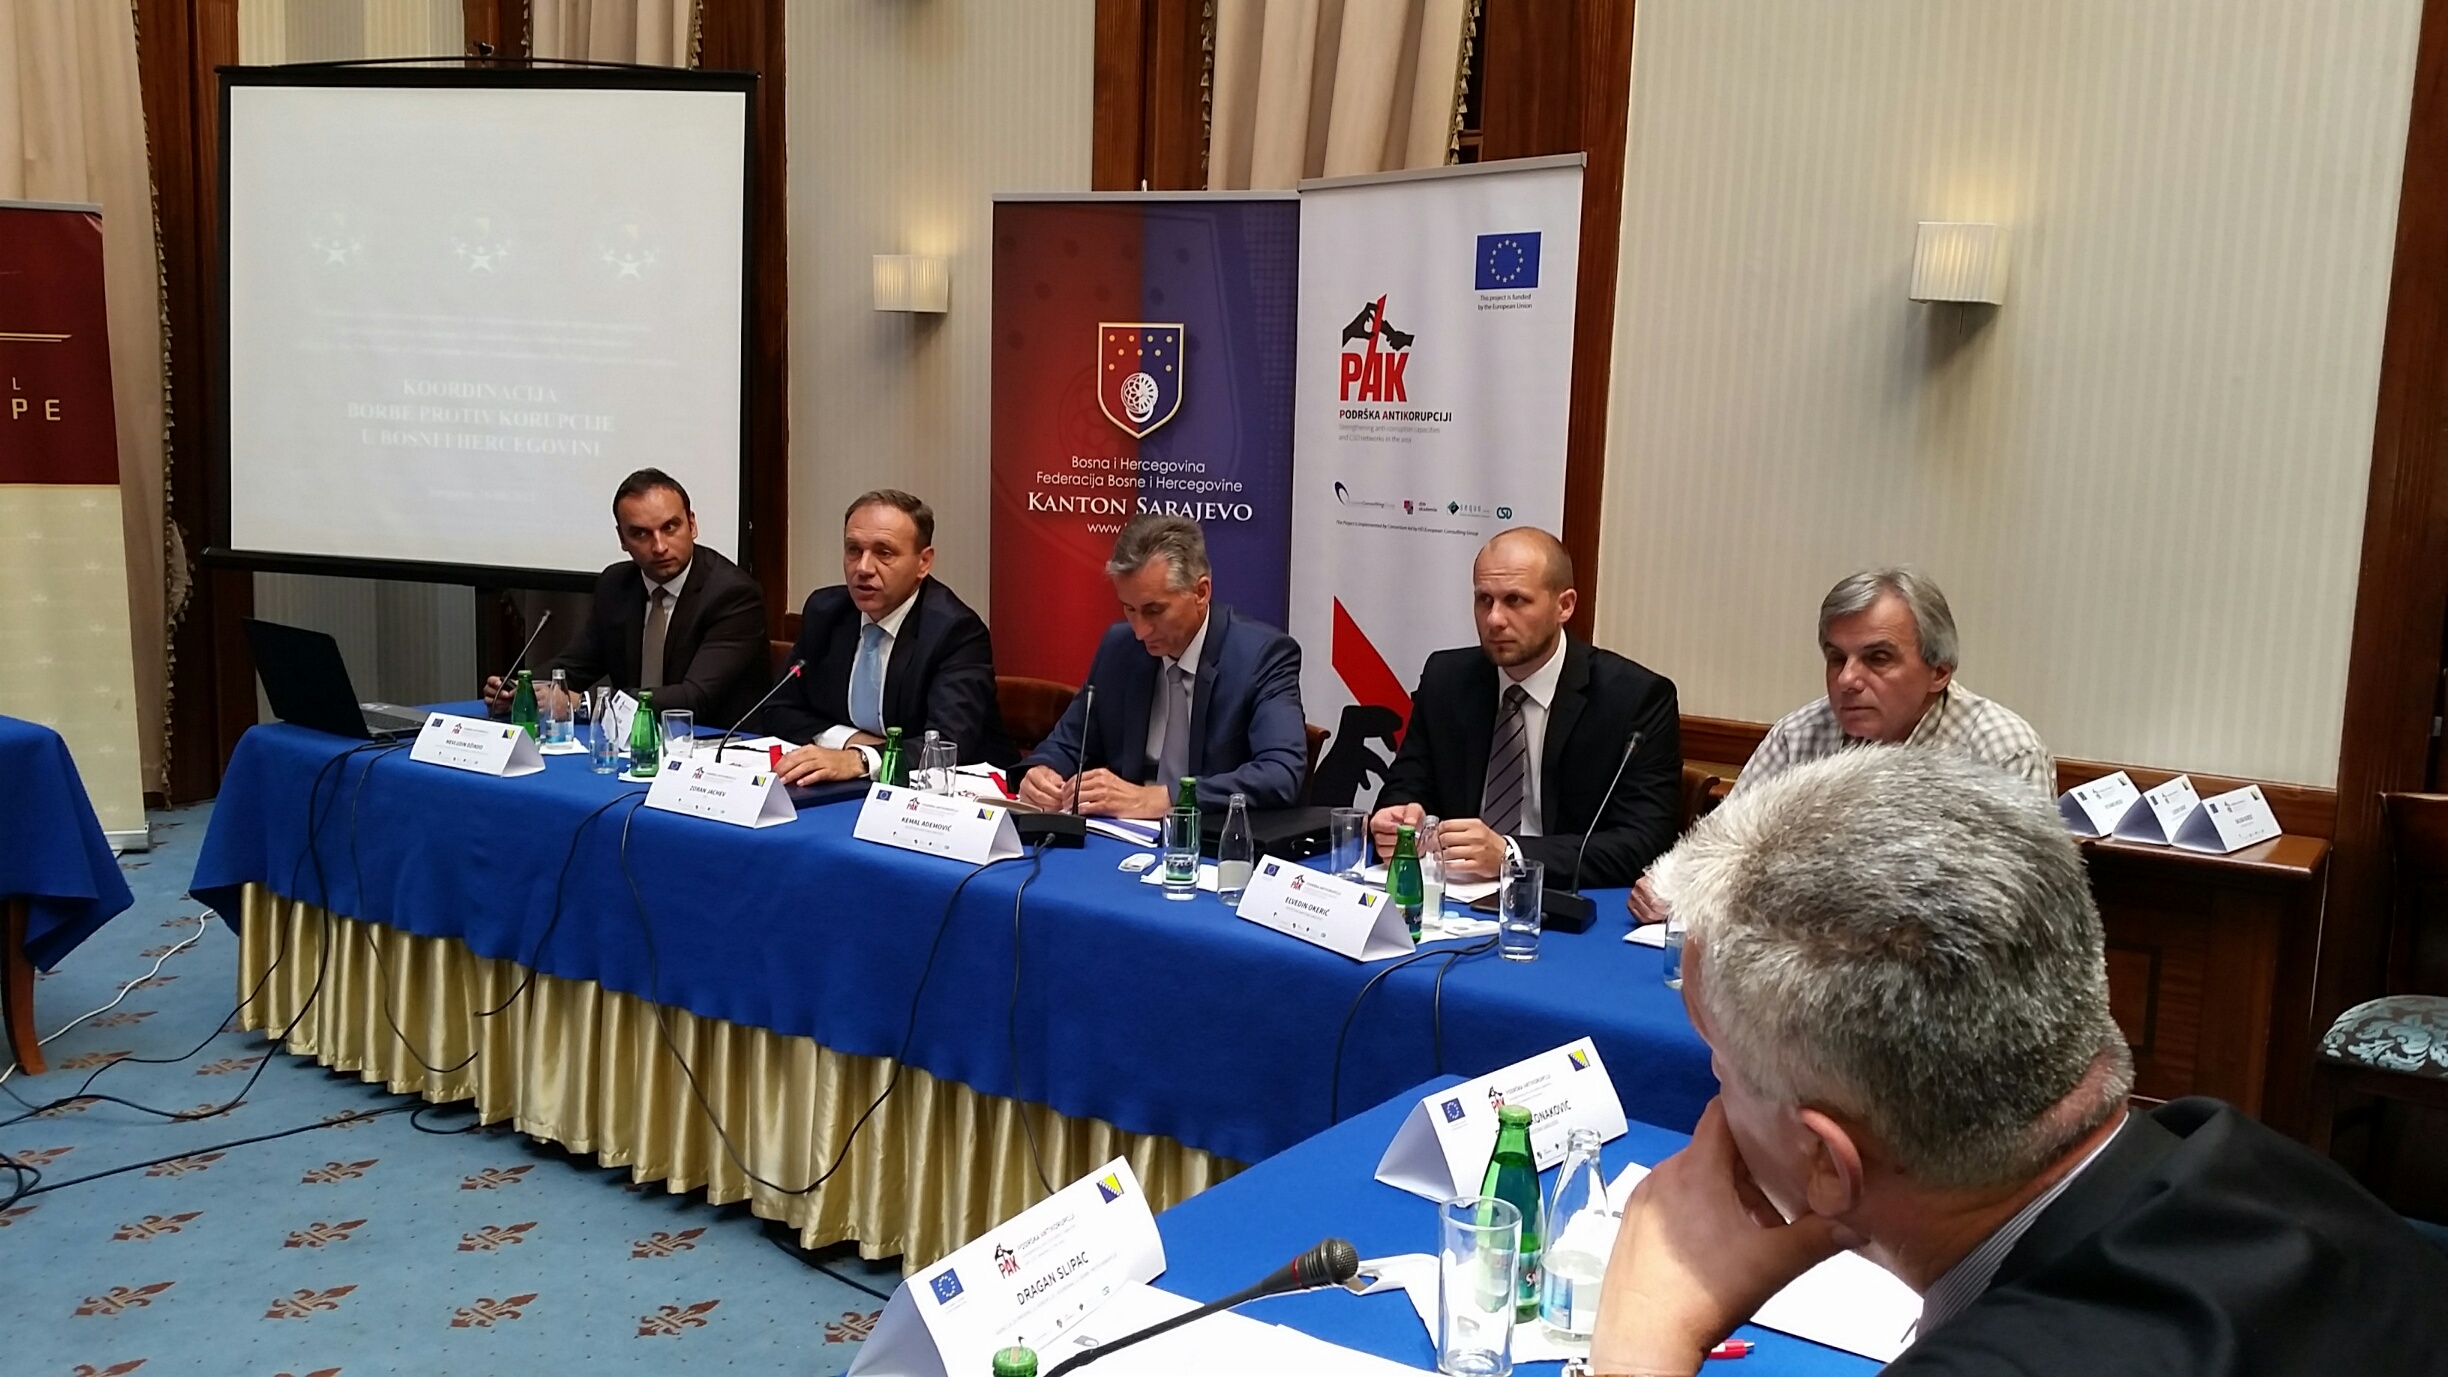 Round table discussion on strengthening the capacity of institutions of Sarajevo Canton in the fight against corruption